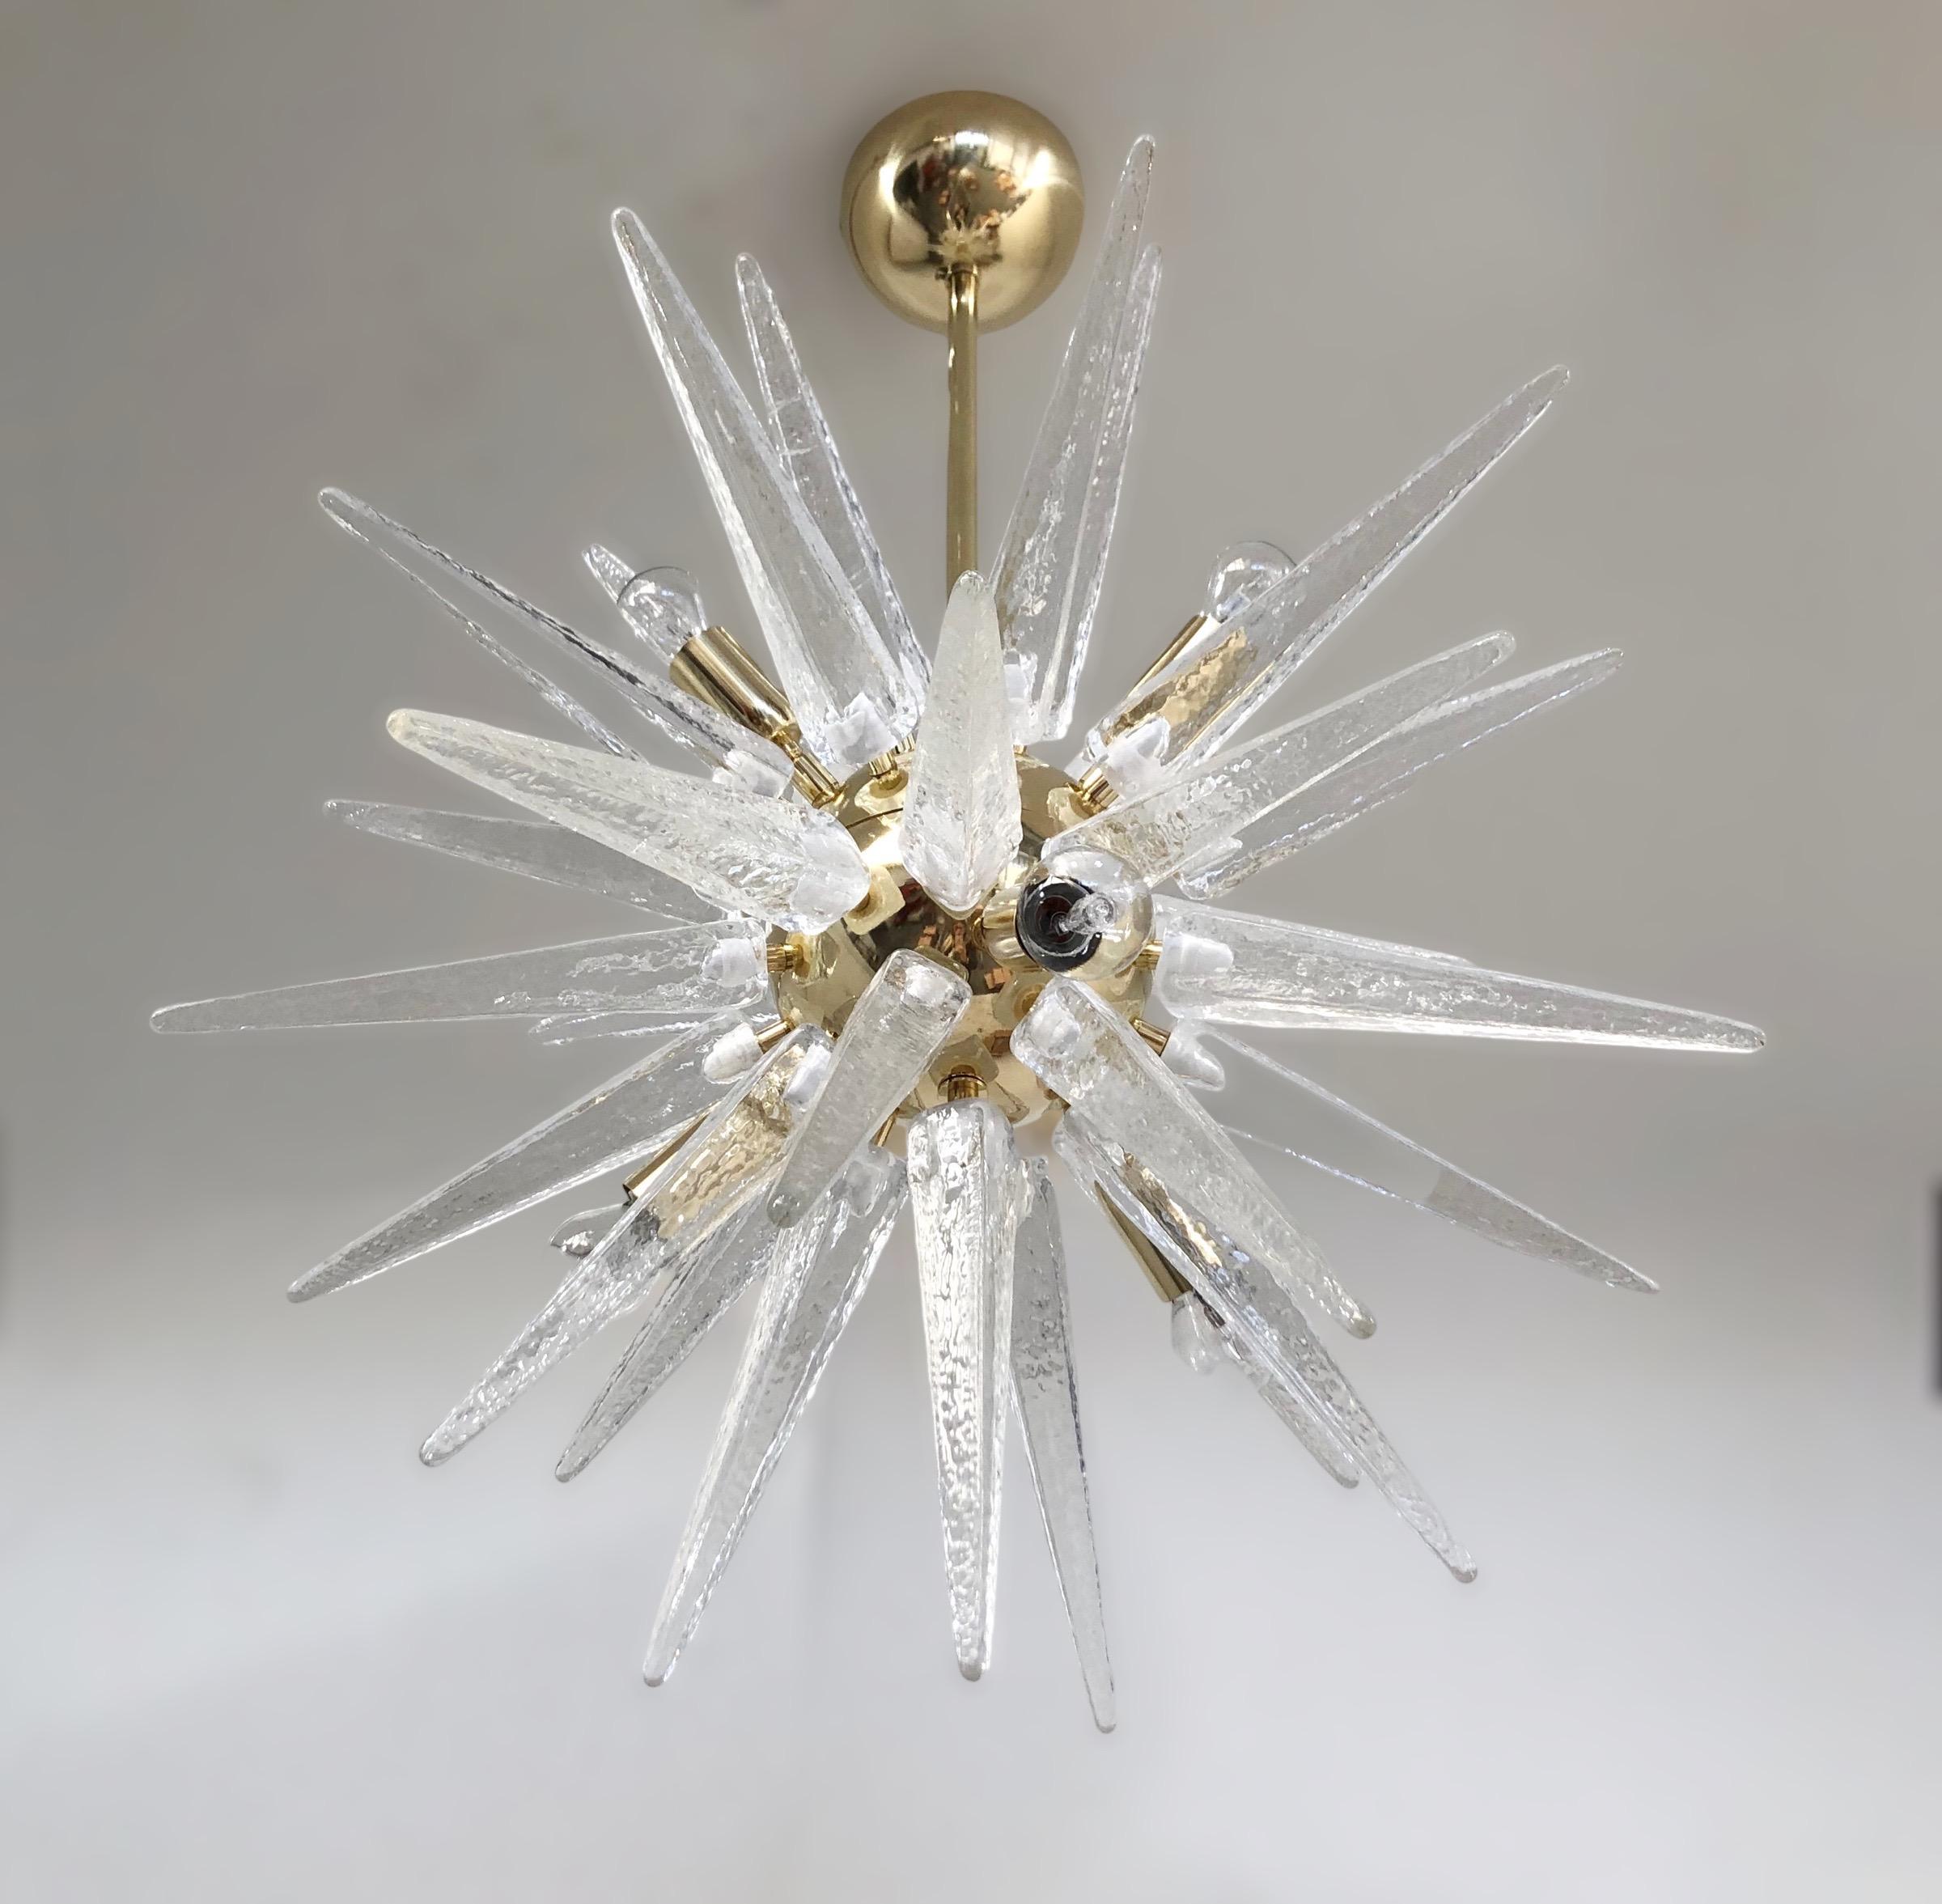 Italian modern Sputnik chandelier with clear murano glass shards spikes, mounted on unlacquered polished brass frame, designed by Fabio Bergomi for Fabio Ltd / Made in Italy
6 lights / E12 or E14 type / max 40W each
Measures: Diameter 24 inches,